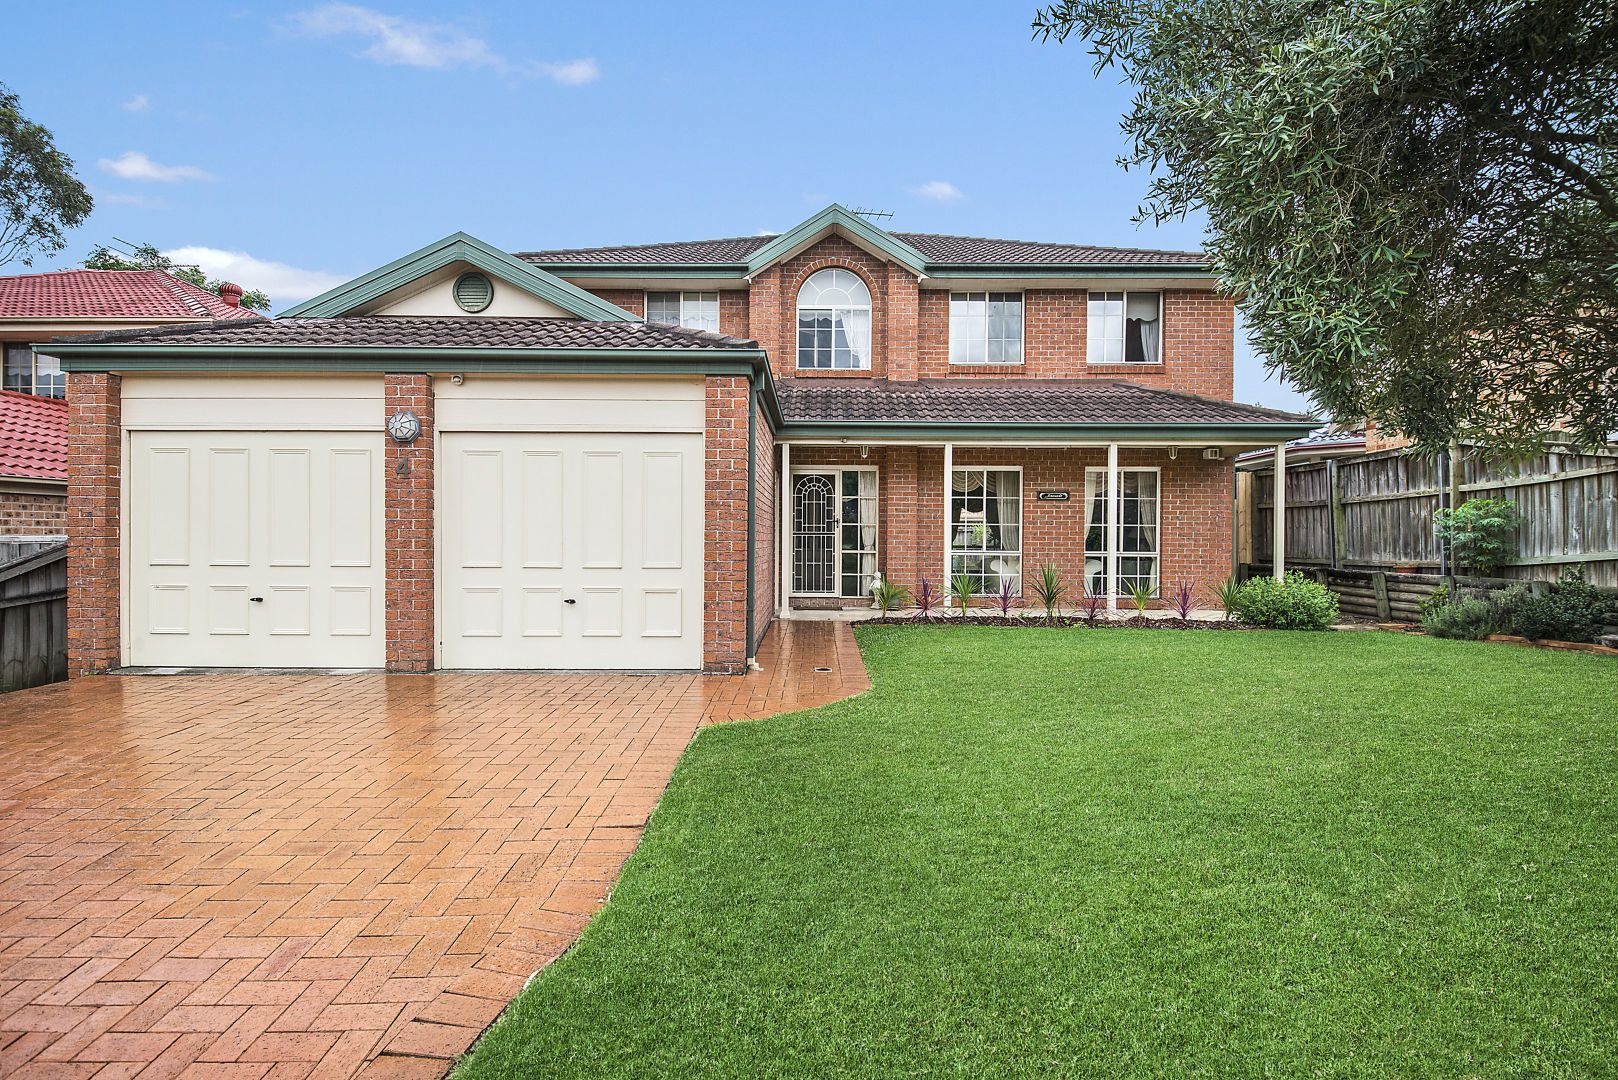 4 Blundell Circuit, Kellyville NSW 2155